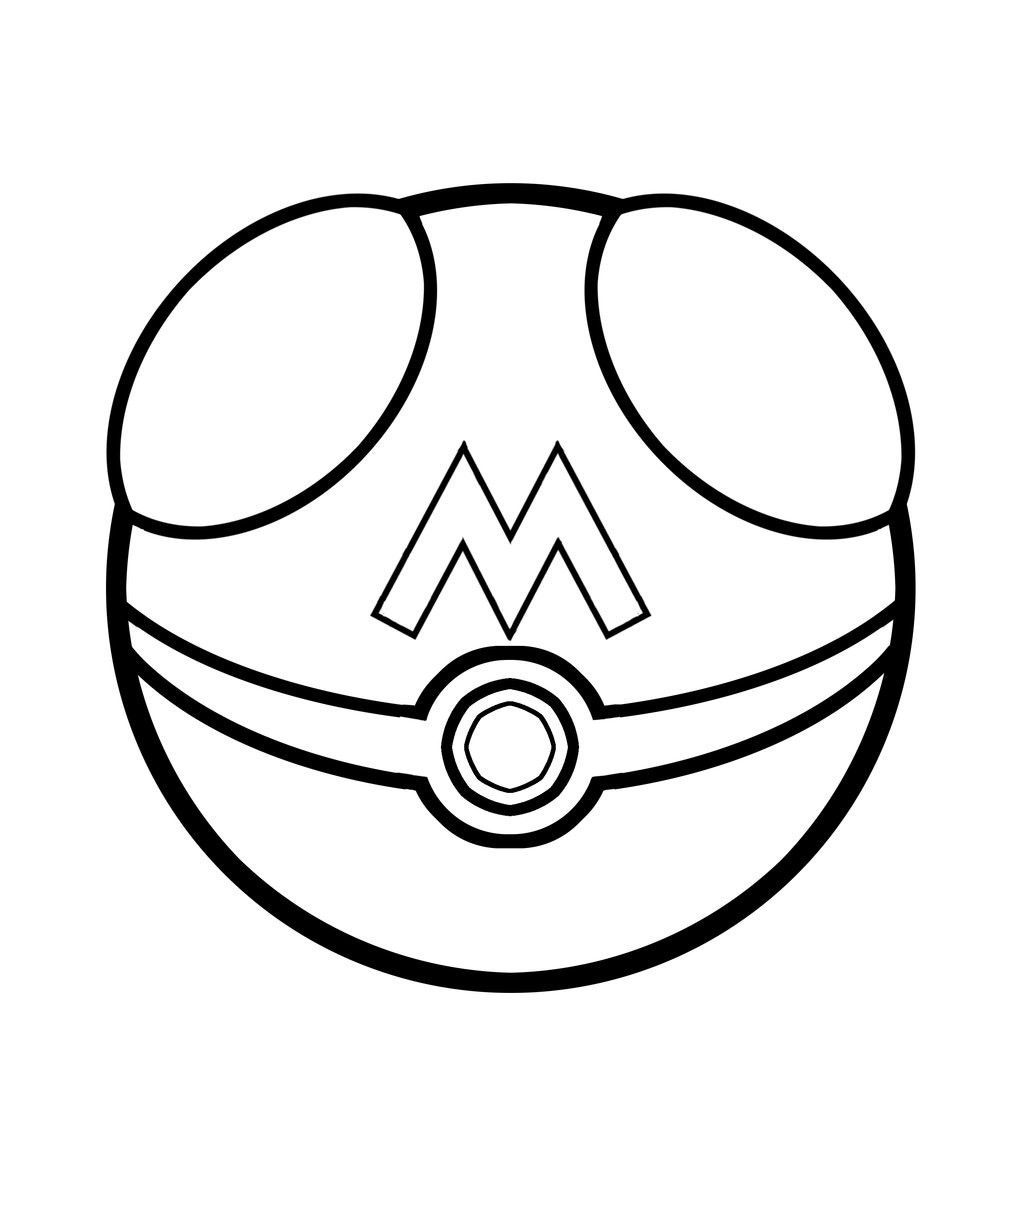 Pokemon Coloring Pages Pokeball – From the thousands of ...